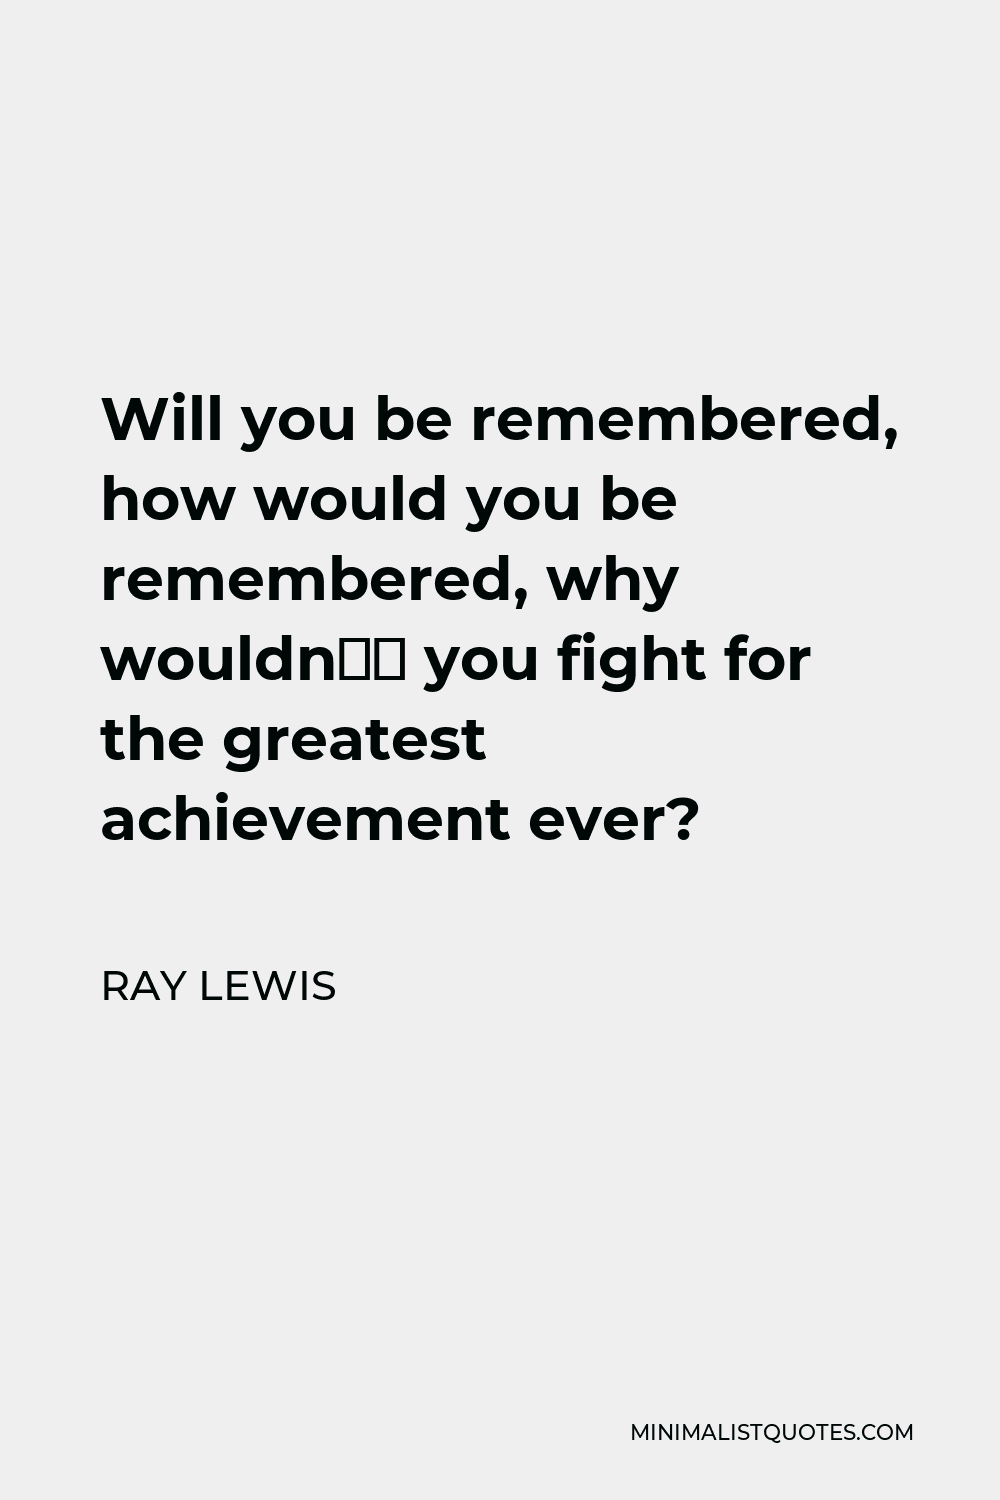 Ray Lewis Quote - Will you be remembered, how would you be remembered, why wouldn’t you fight for the greatest achievement ever?